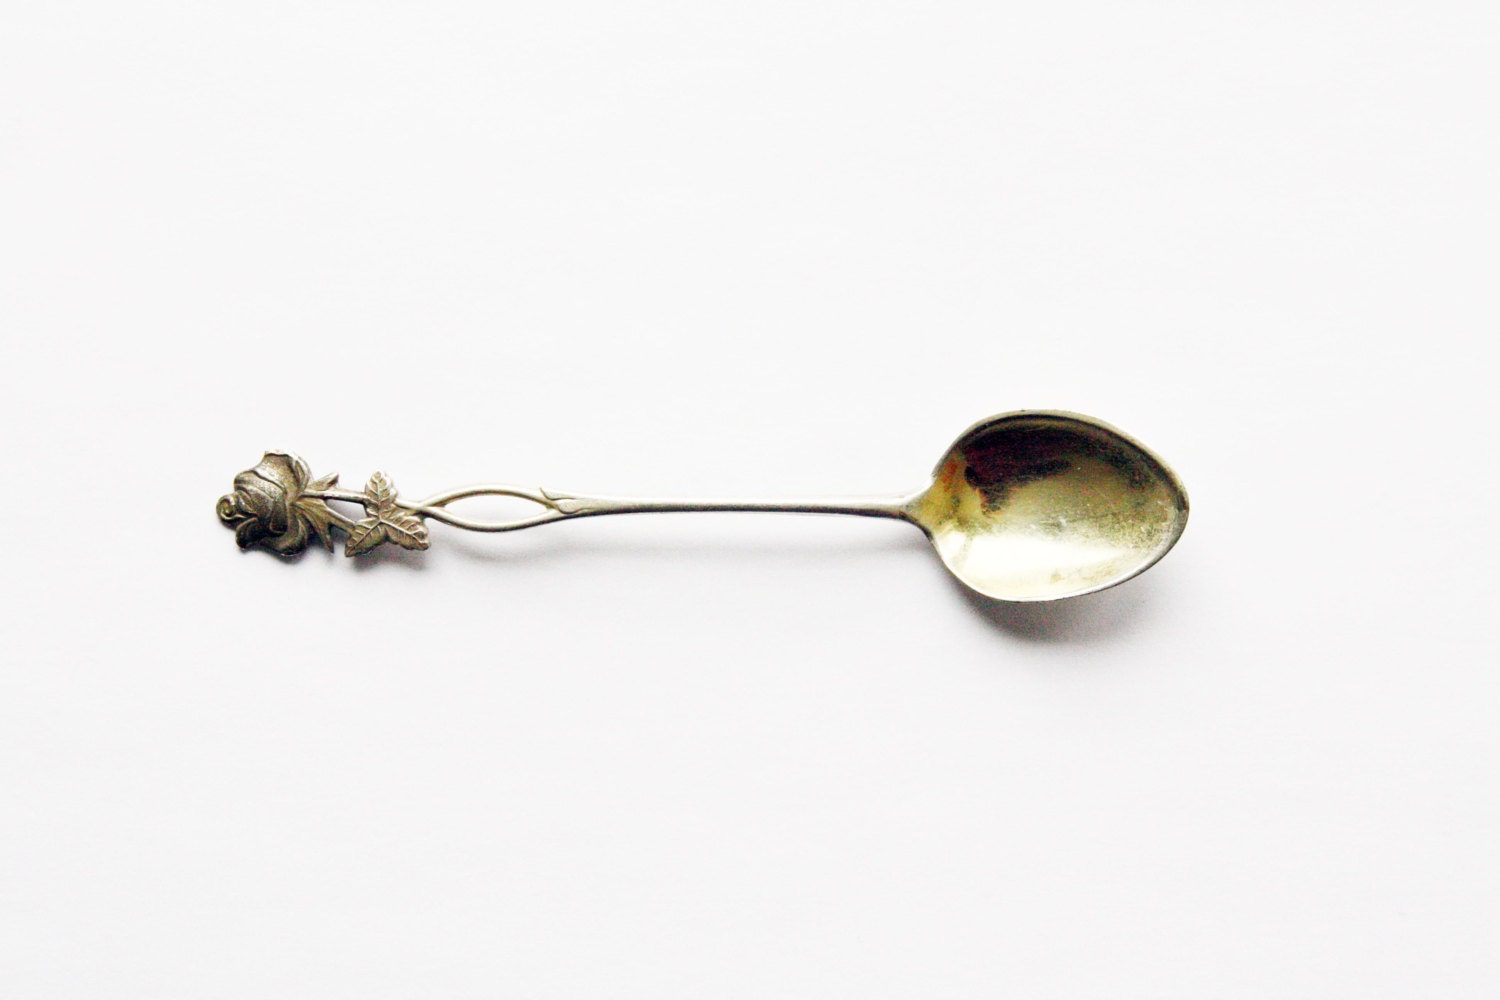 Vintage Finnish spoon with rose, Alpakka silver flatware for repurpose, upcycle, DIY spoon ring or pendant - Andolinaswishes